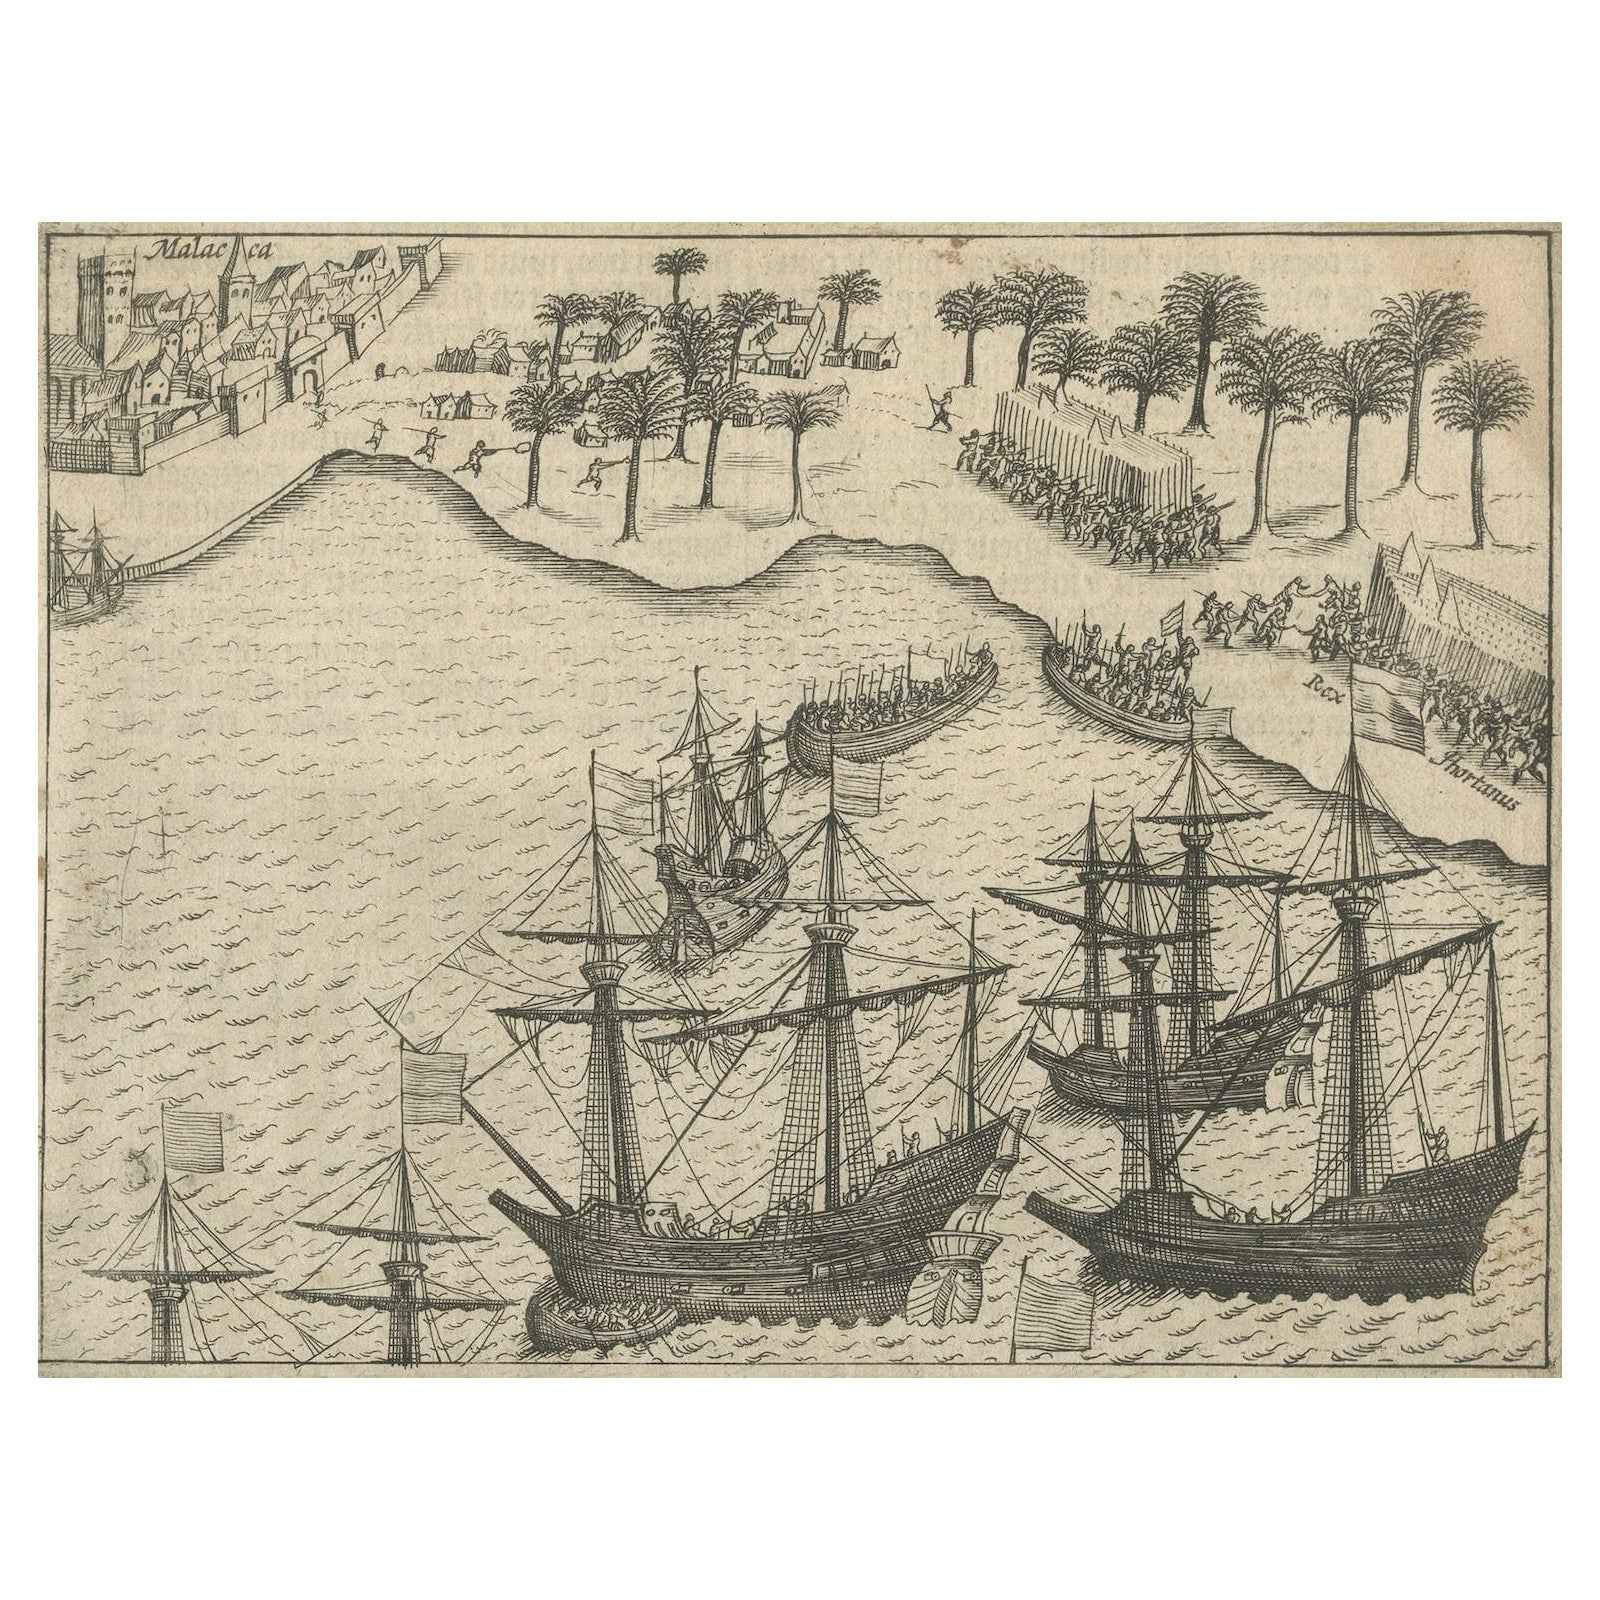 Rare Small Engravings of the Dutch Siege of Malacca in 1606, Published in 1614